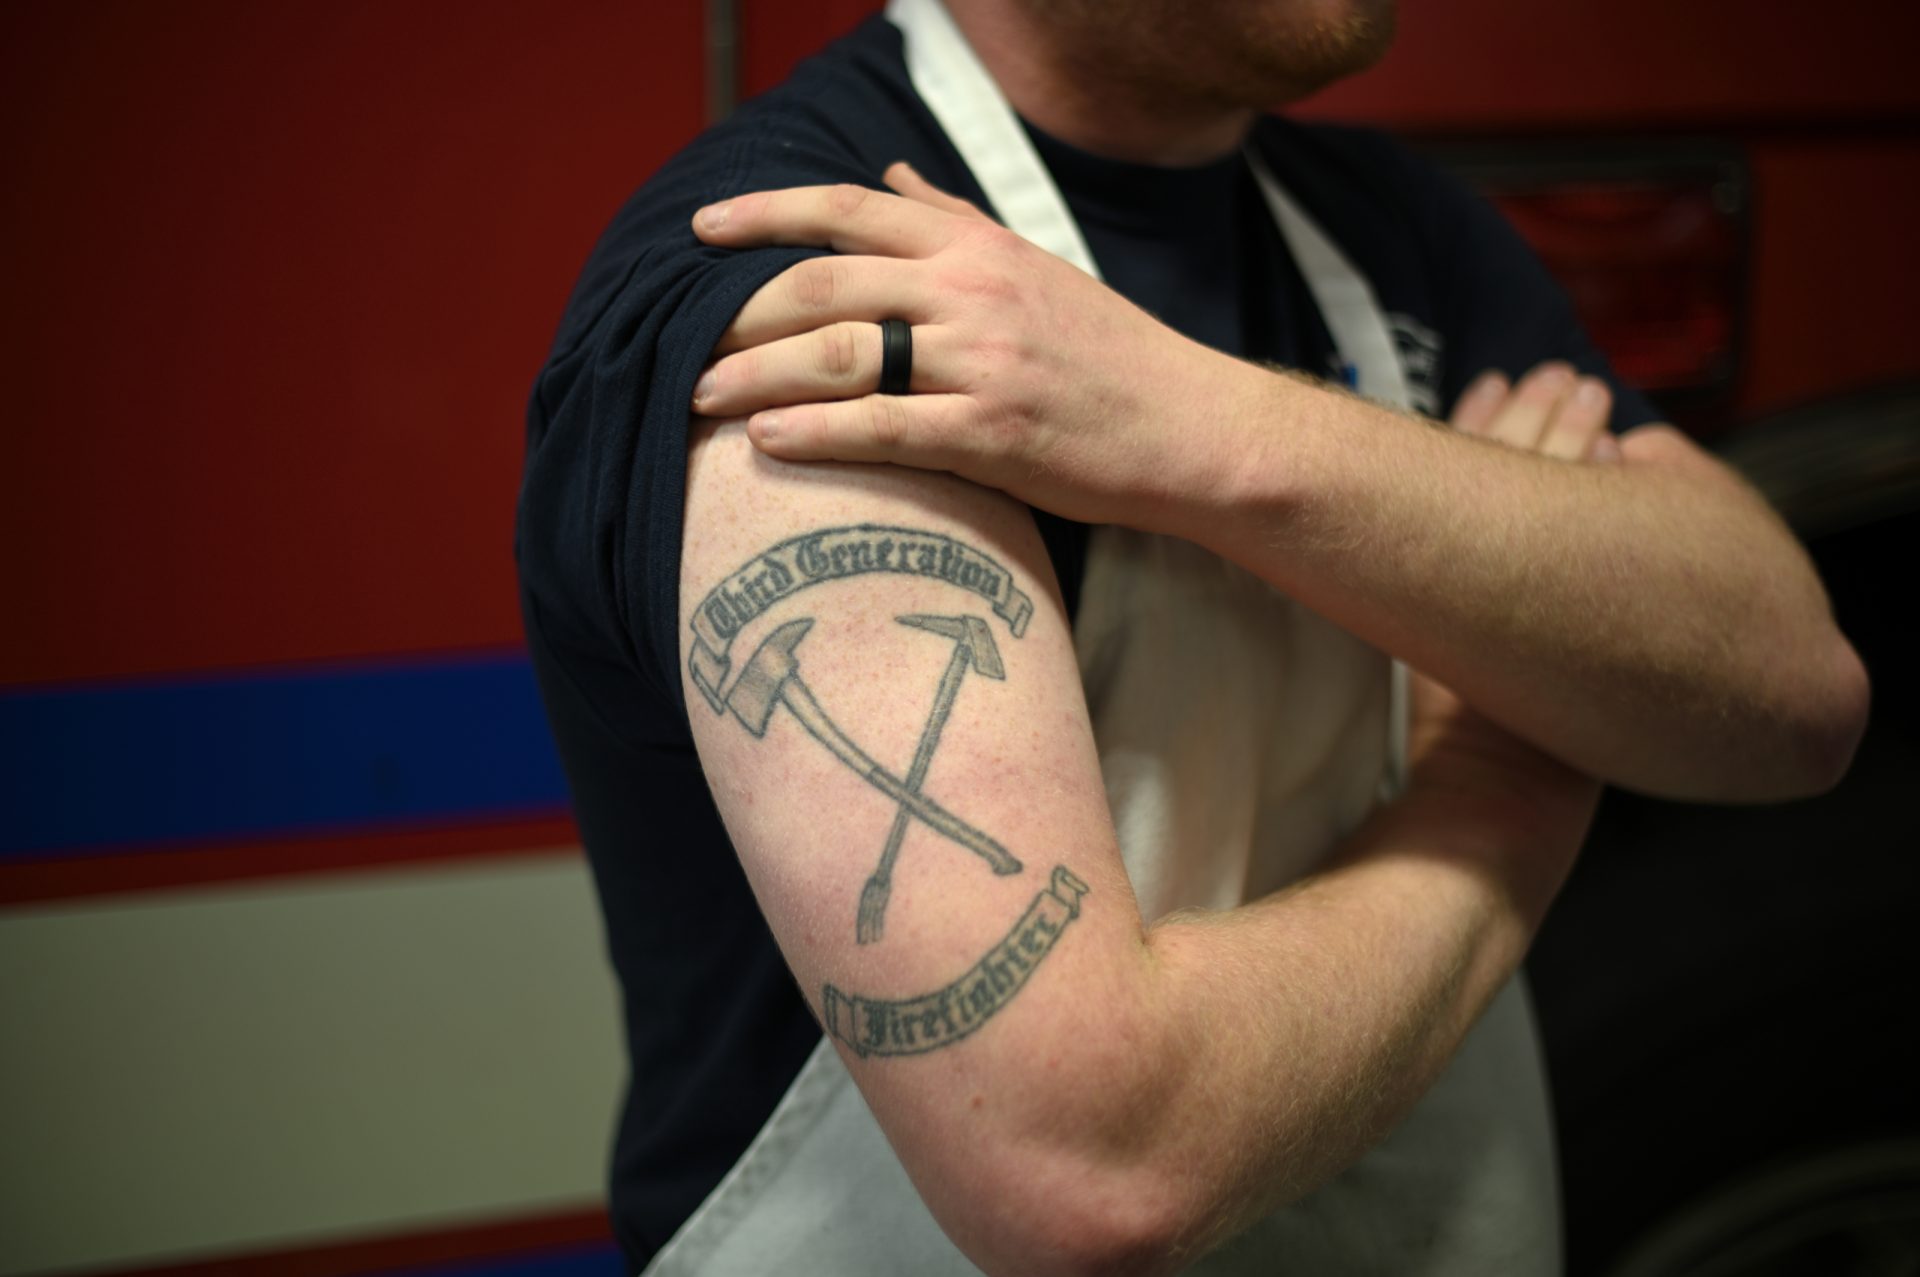 Third generation firefighter AJ Alves, 25 shows his tattoo as he poses for a photo at Humane Fire Co., in Pottsville, PA, on December 15, 2019.